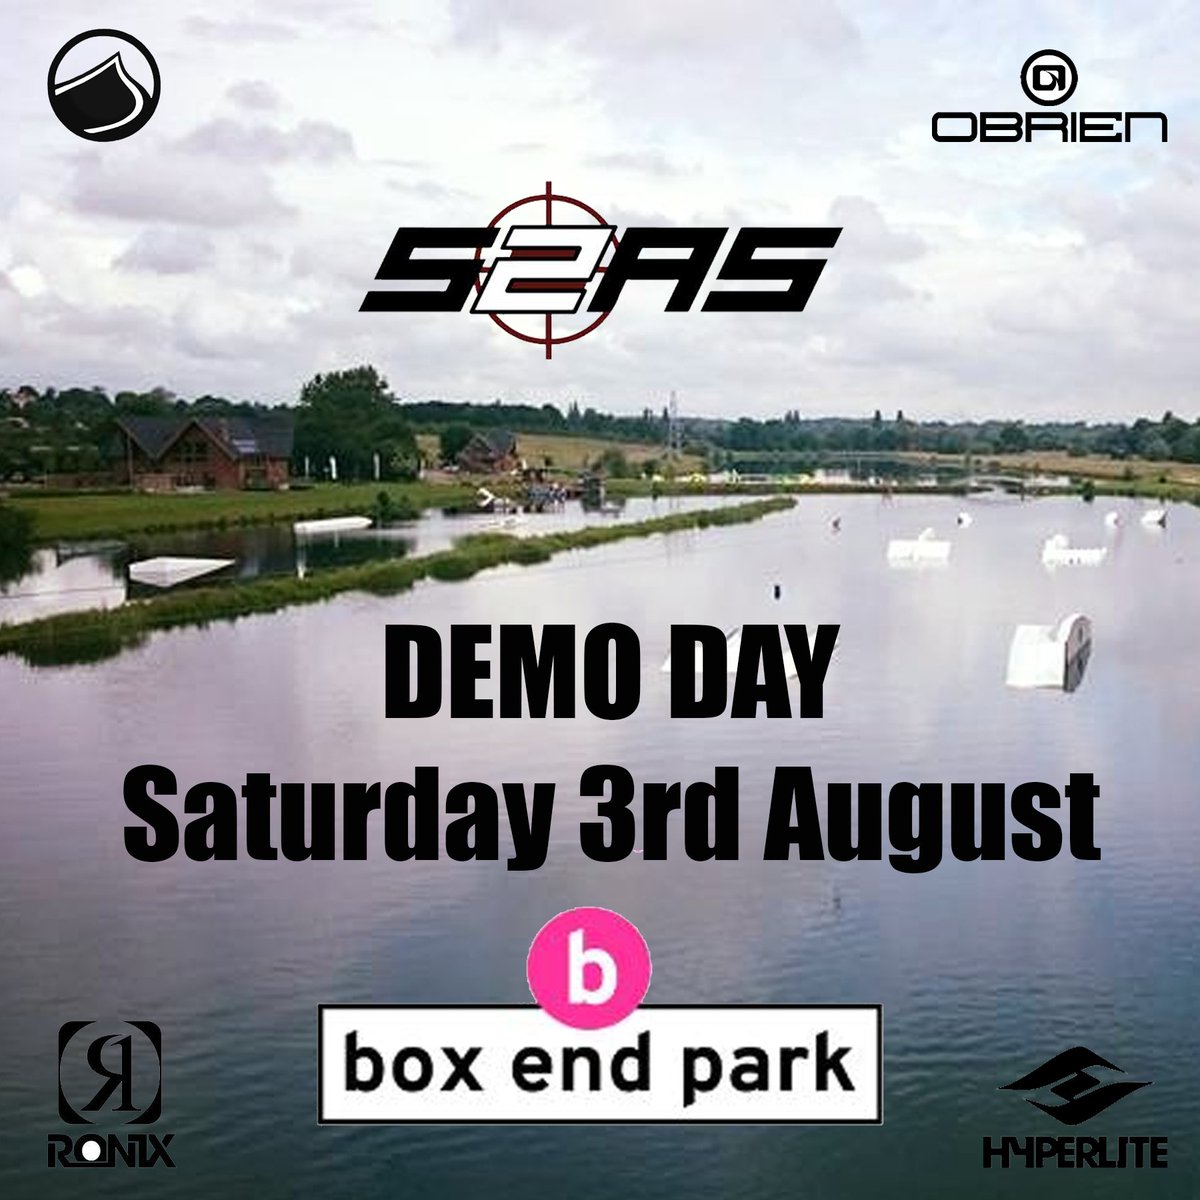 Come see us @BoxEndPark this Saturday for a S2AS Demo Day! Loads of different boards available to try from #ronixwake #hyperlite #liquidforce #obrien hope to see you there!